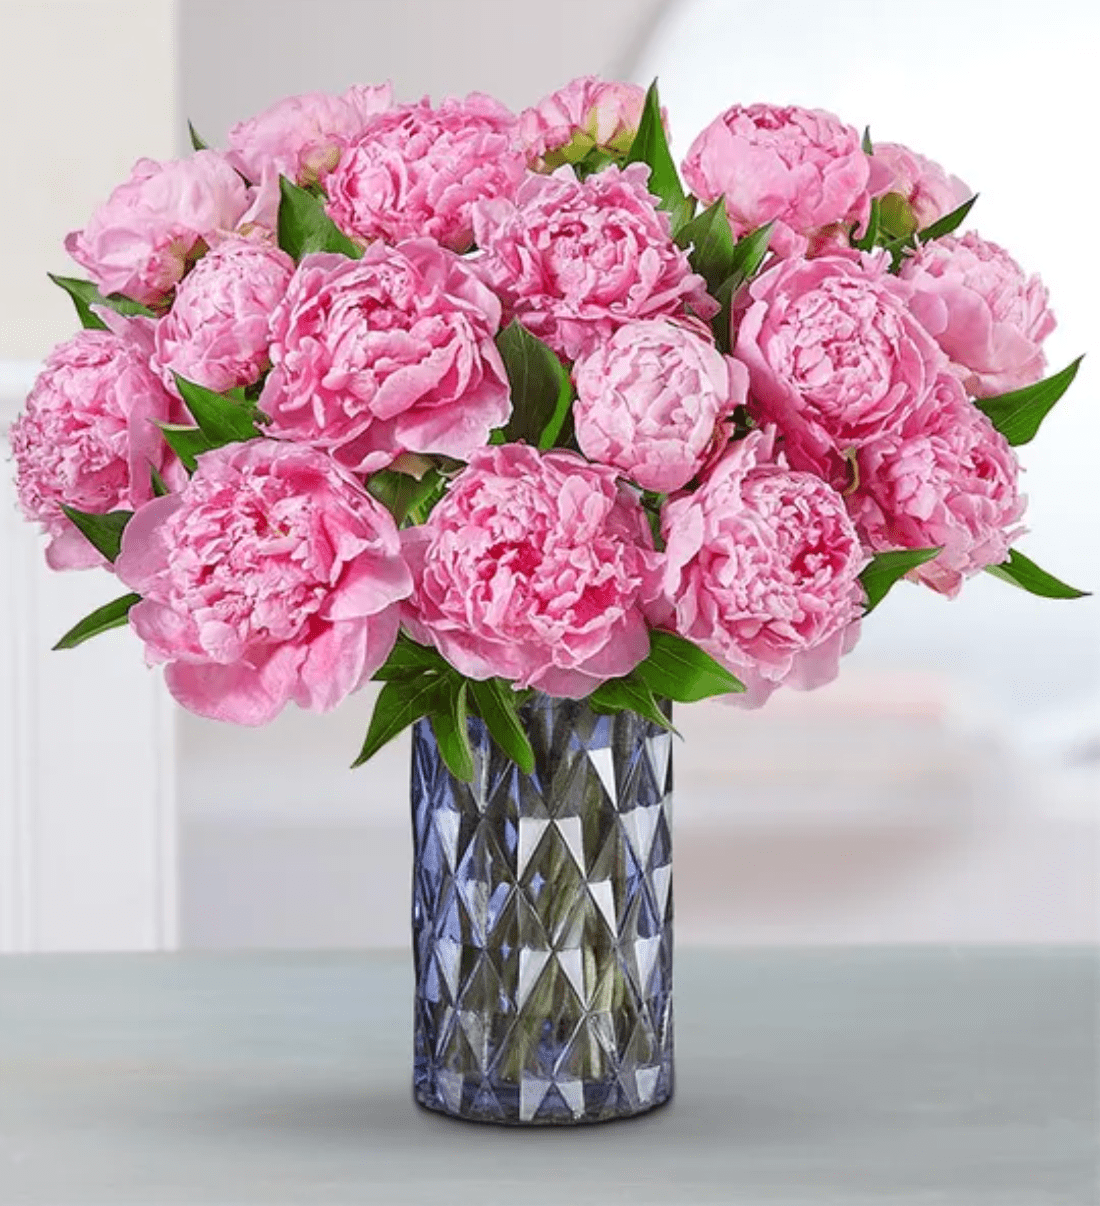 10 Peony Arrangements and Gifts to Send This Spring